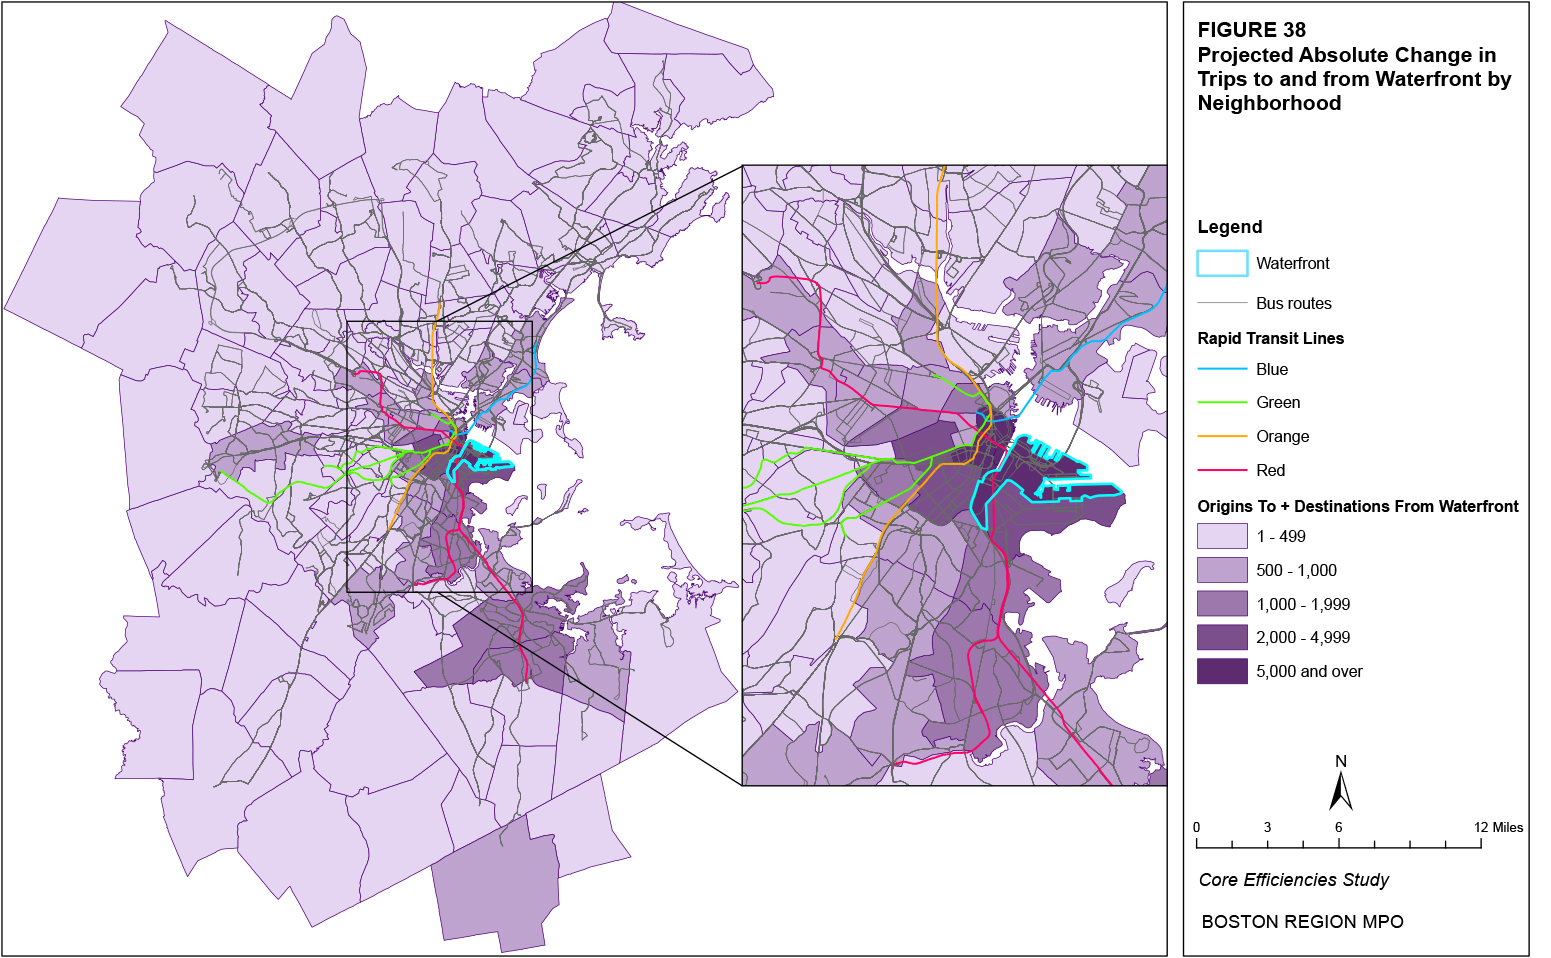 This map shows the projected absolute change in trips to and from the Waterfront neighborhood by neighborhood. 